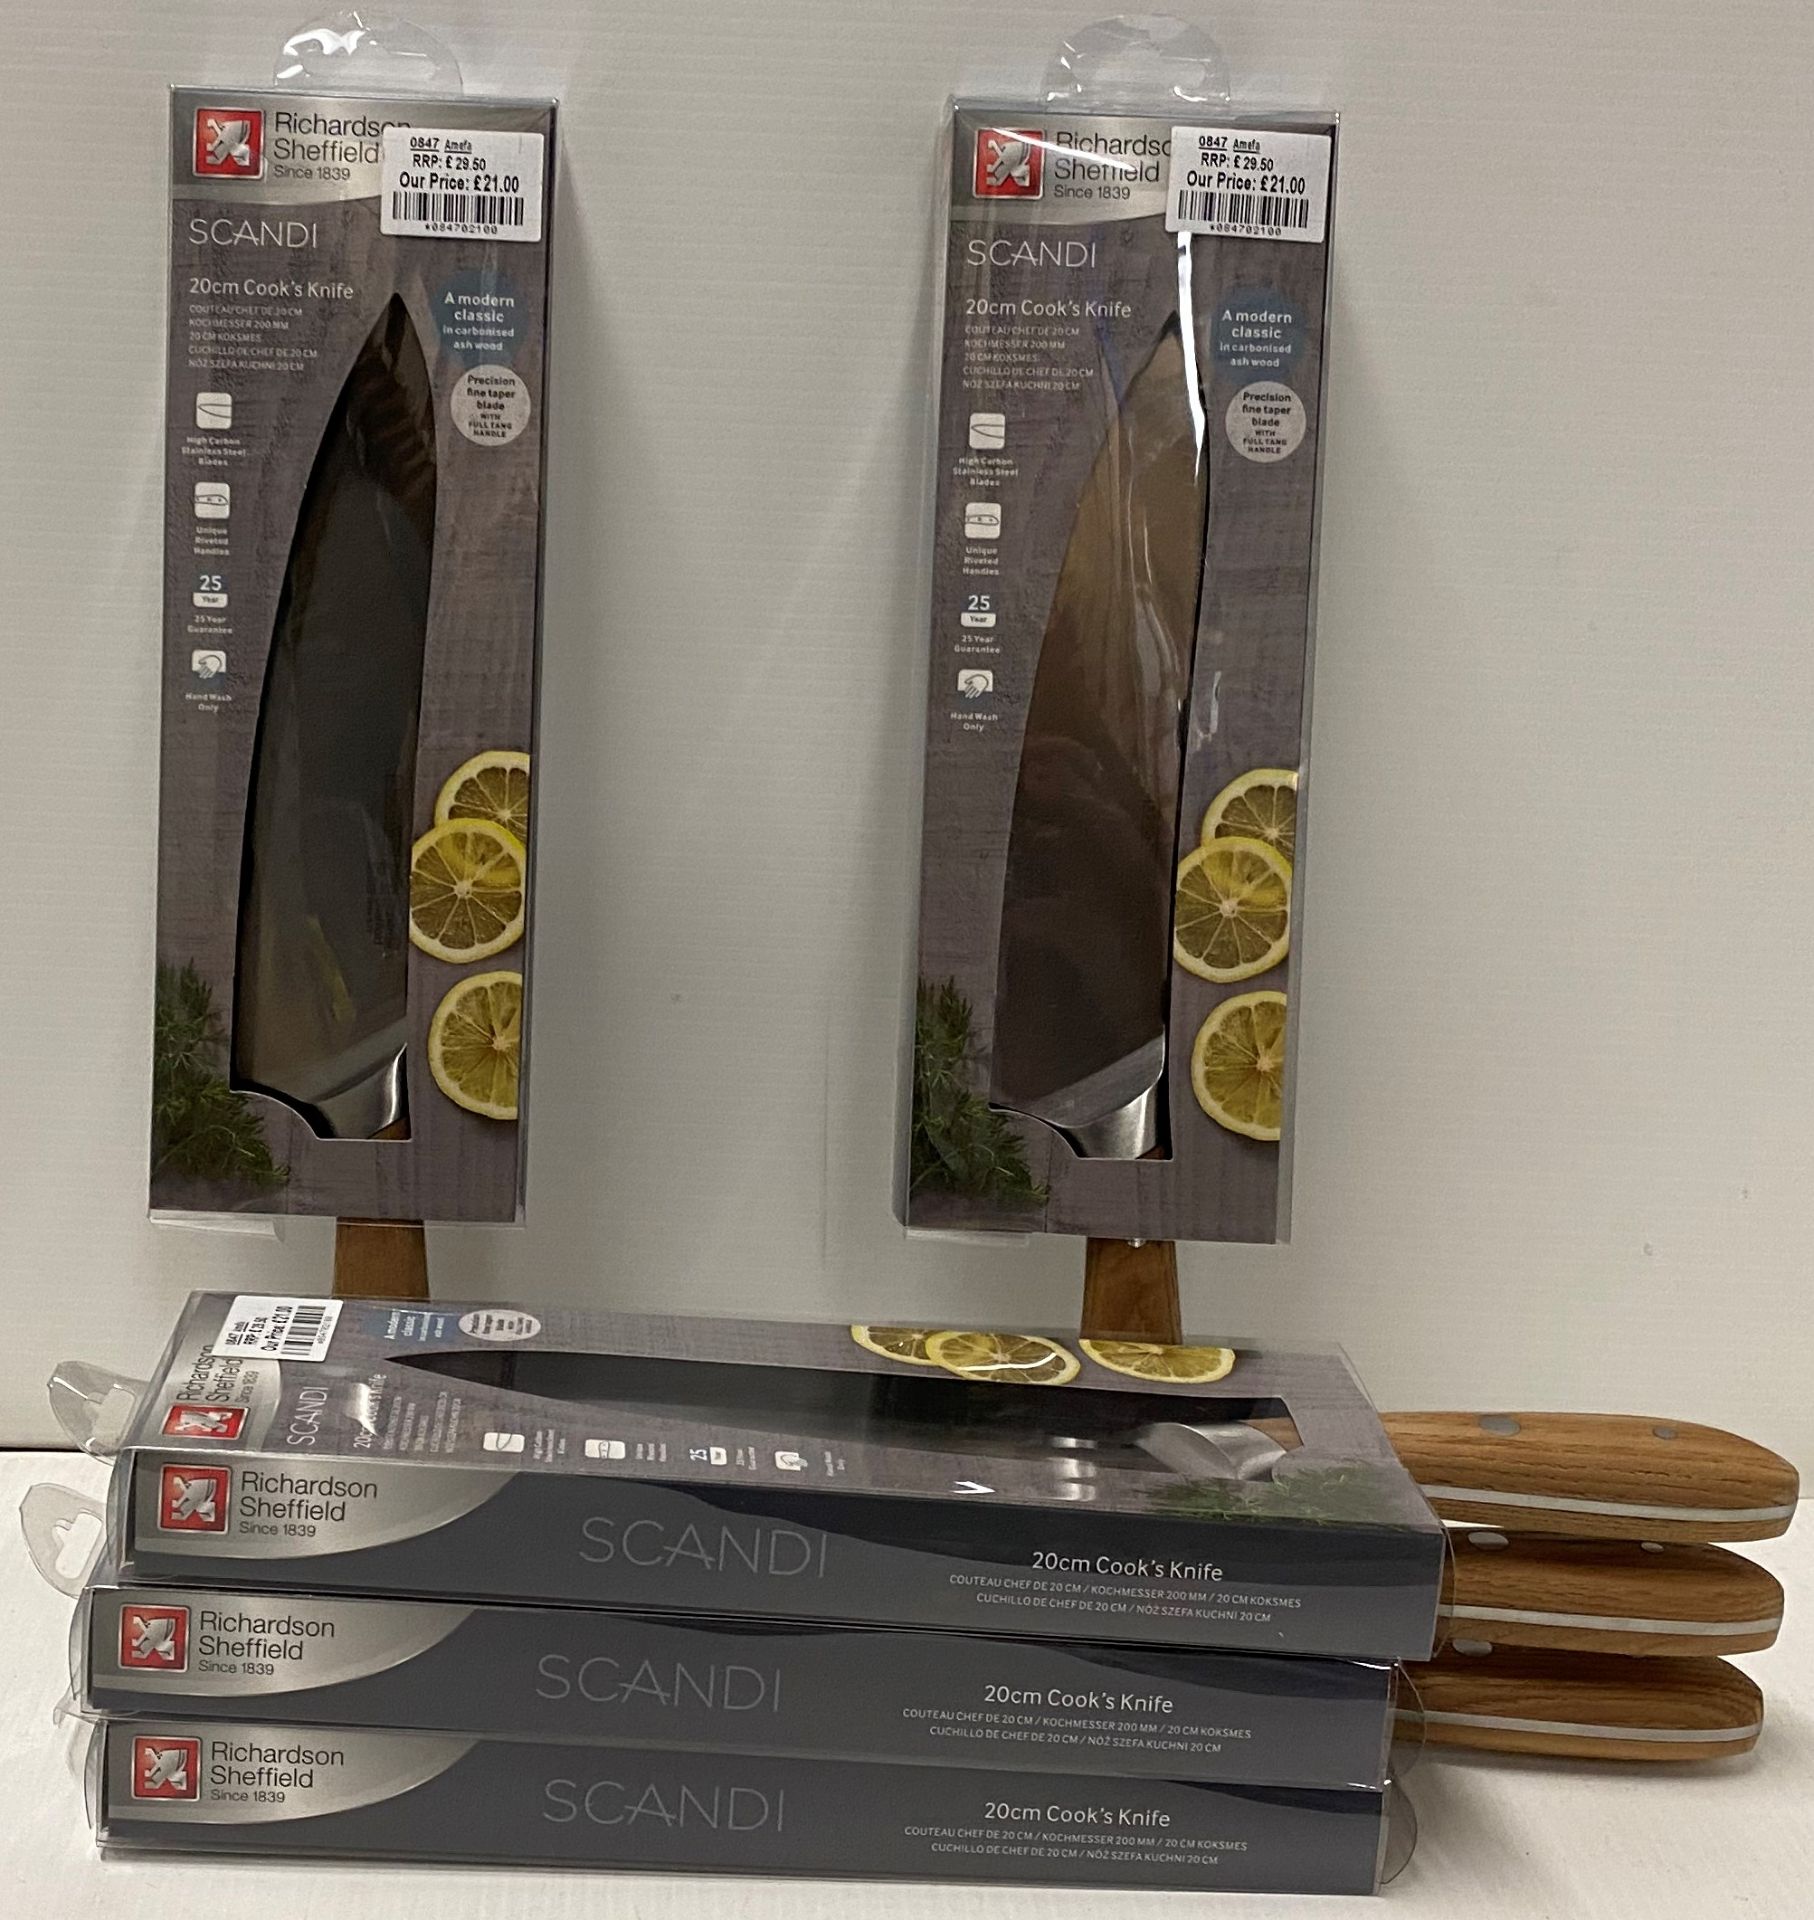 5 x Richardson Sheffield Scandi stainless steel 20cm cook's knives RRP £29.